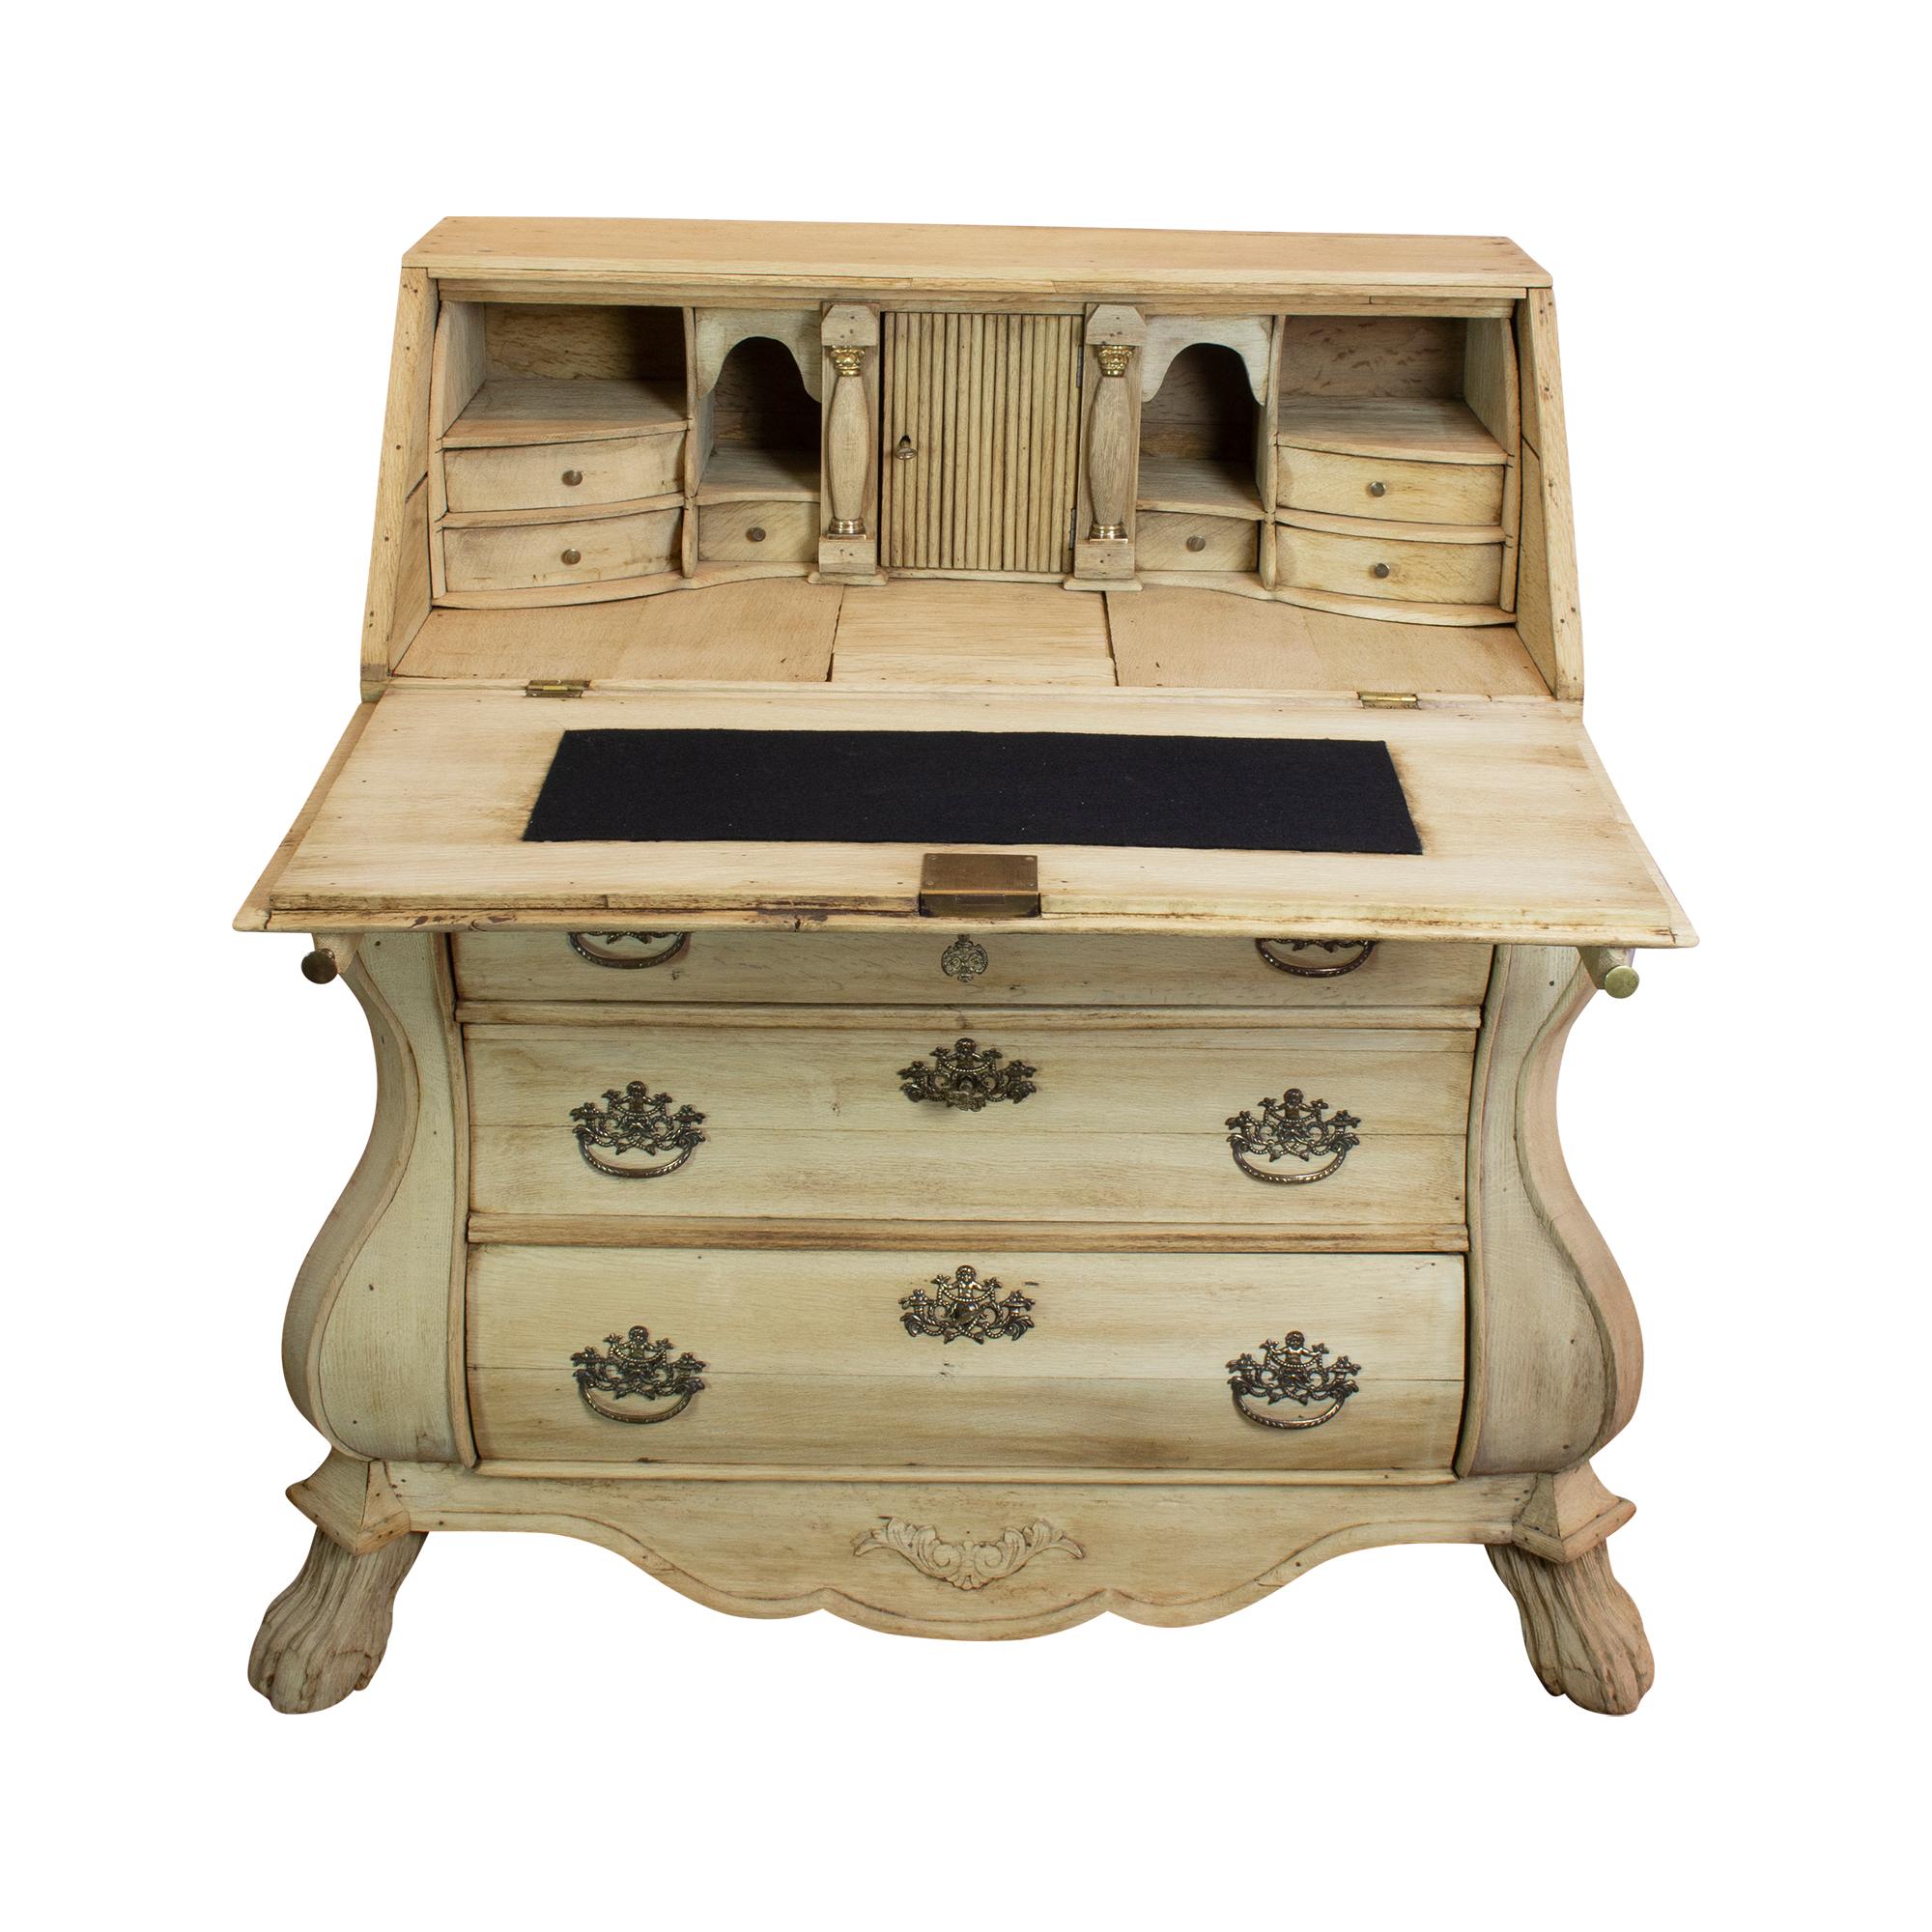 The secretary made of Dutch oak from the 19th century rich in decorations consists of an upper and lower part. The upper part is hinged to the front. The flap sits on two pullouts that must be pulled out first. In the inner part of the secretary